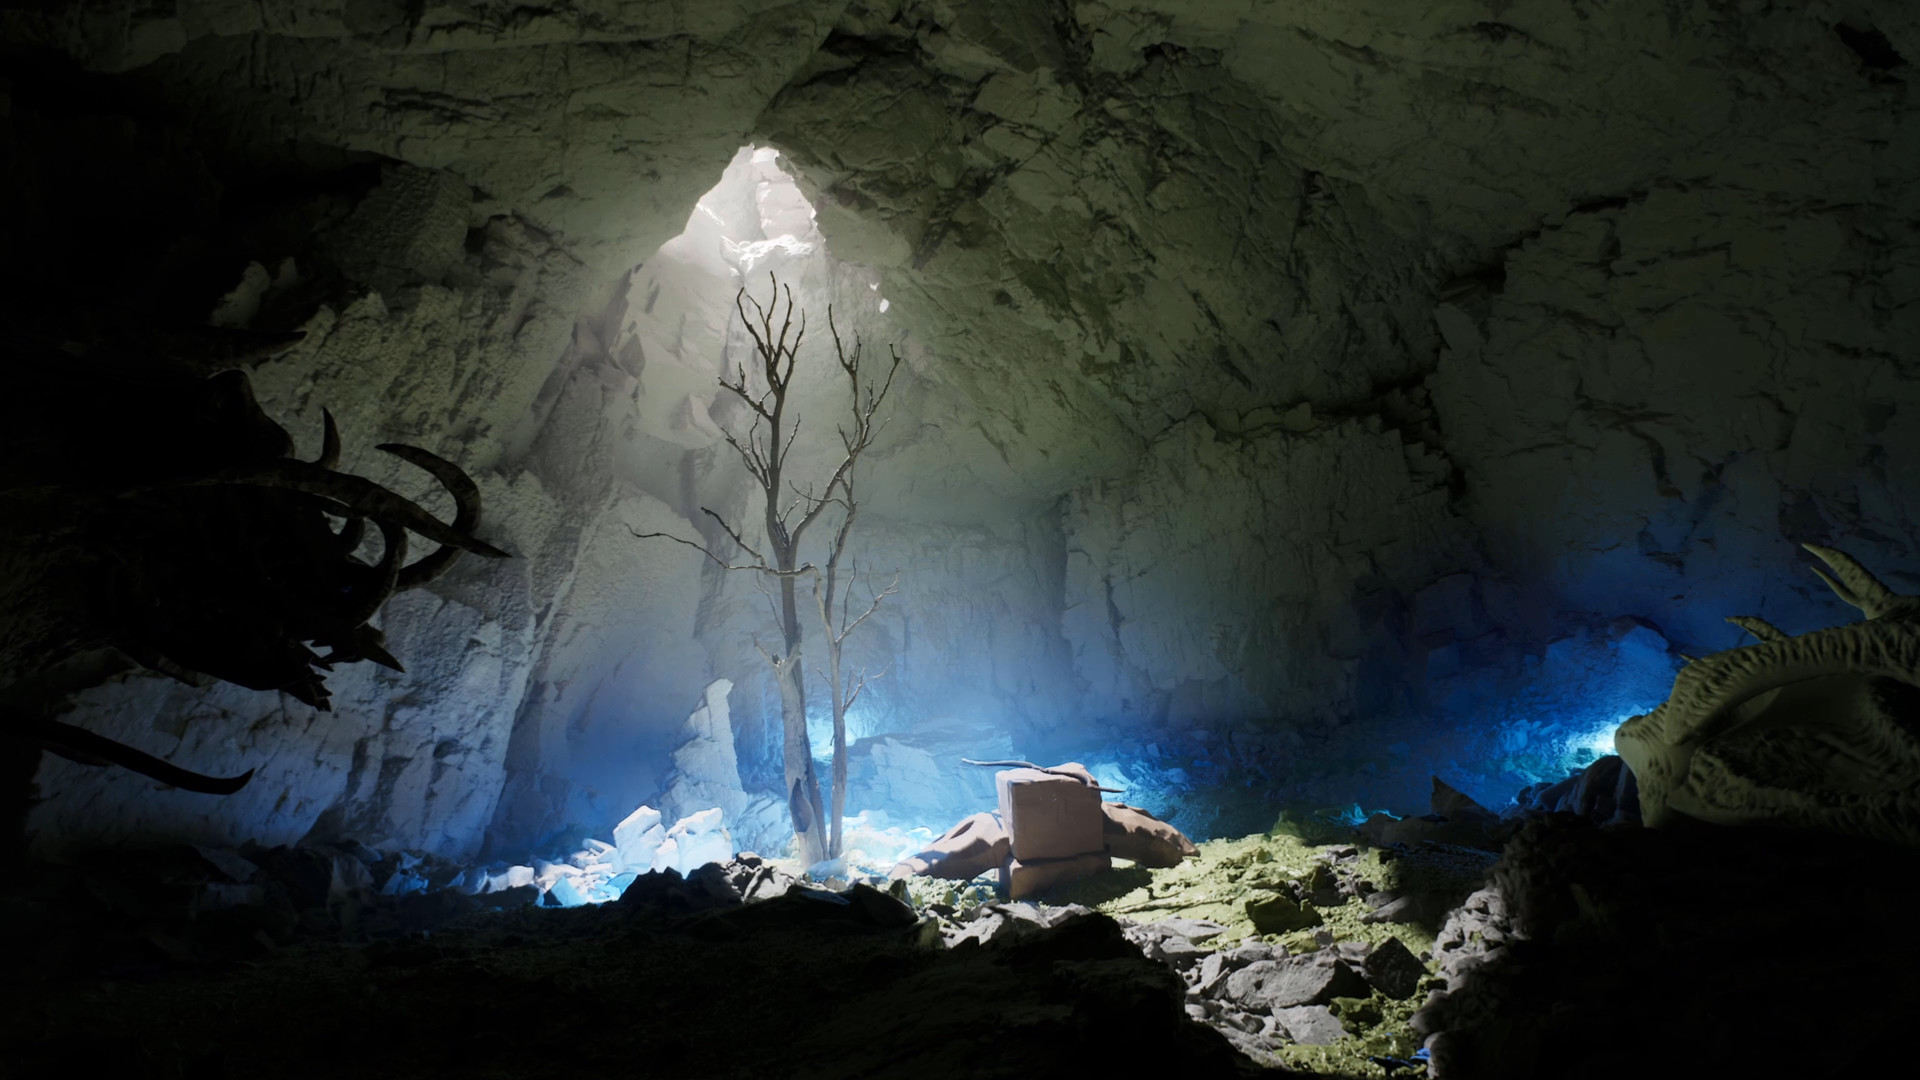 a single tree thrusts towards an opening in a cave ceiling with light shafts streaming down